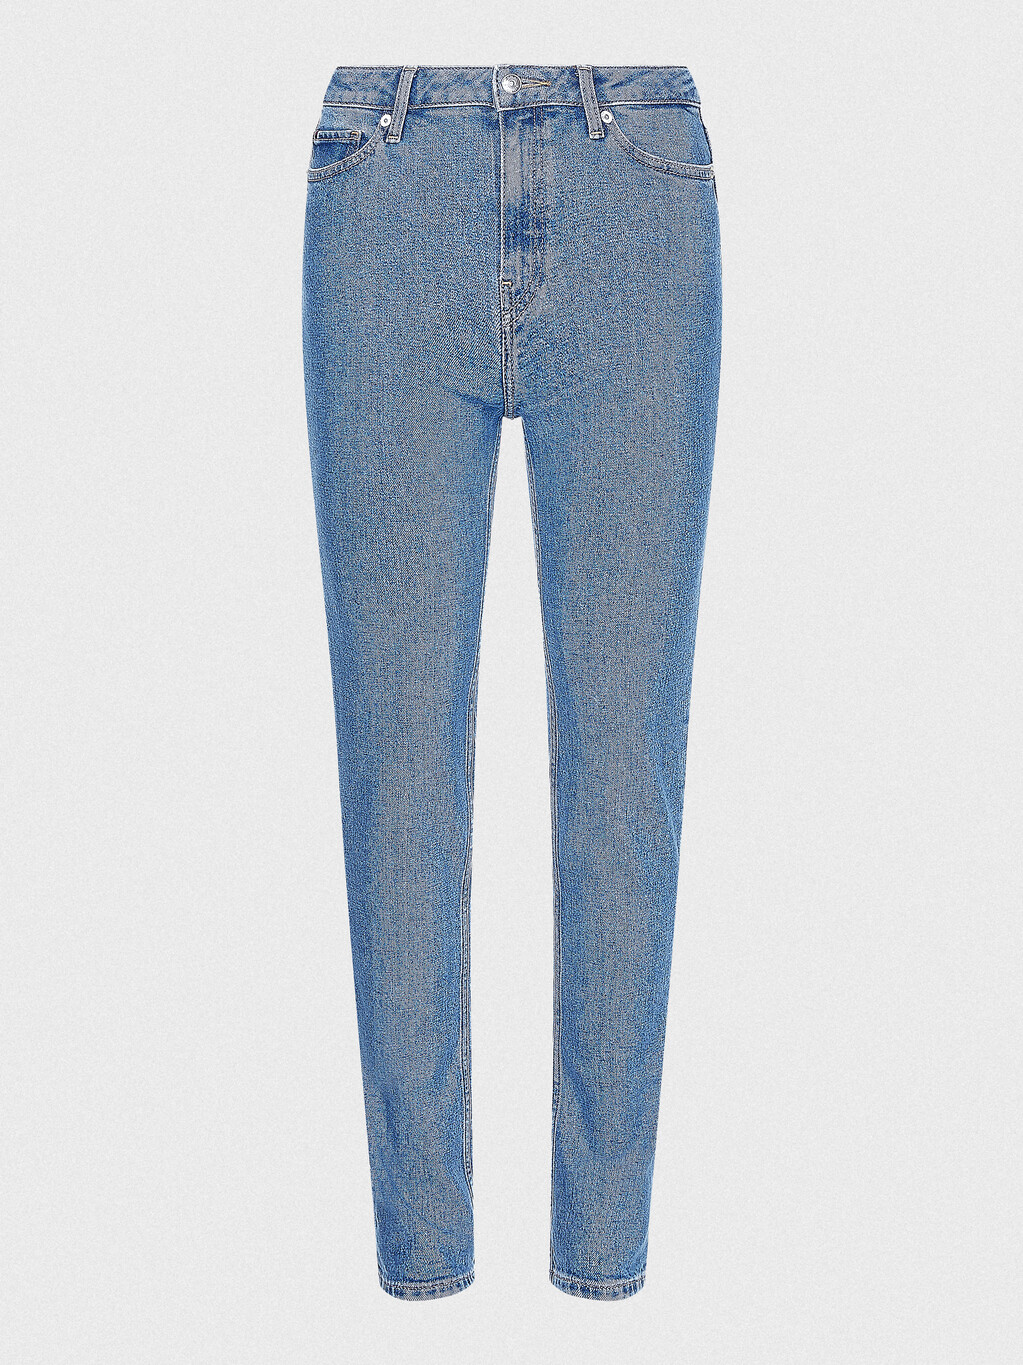 Buy ROME MID RISE STRAIGHT FADED JEANS in color BLUE